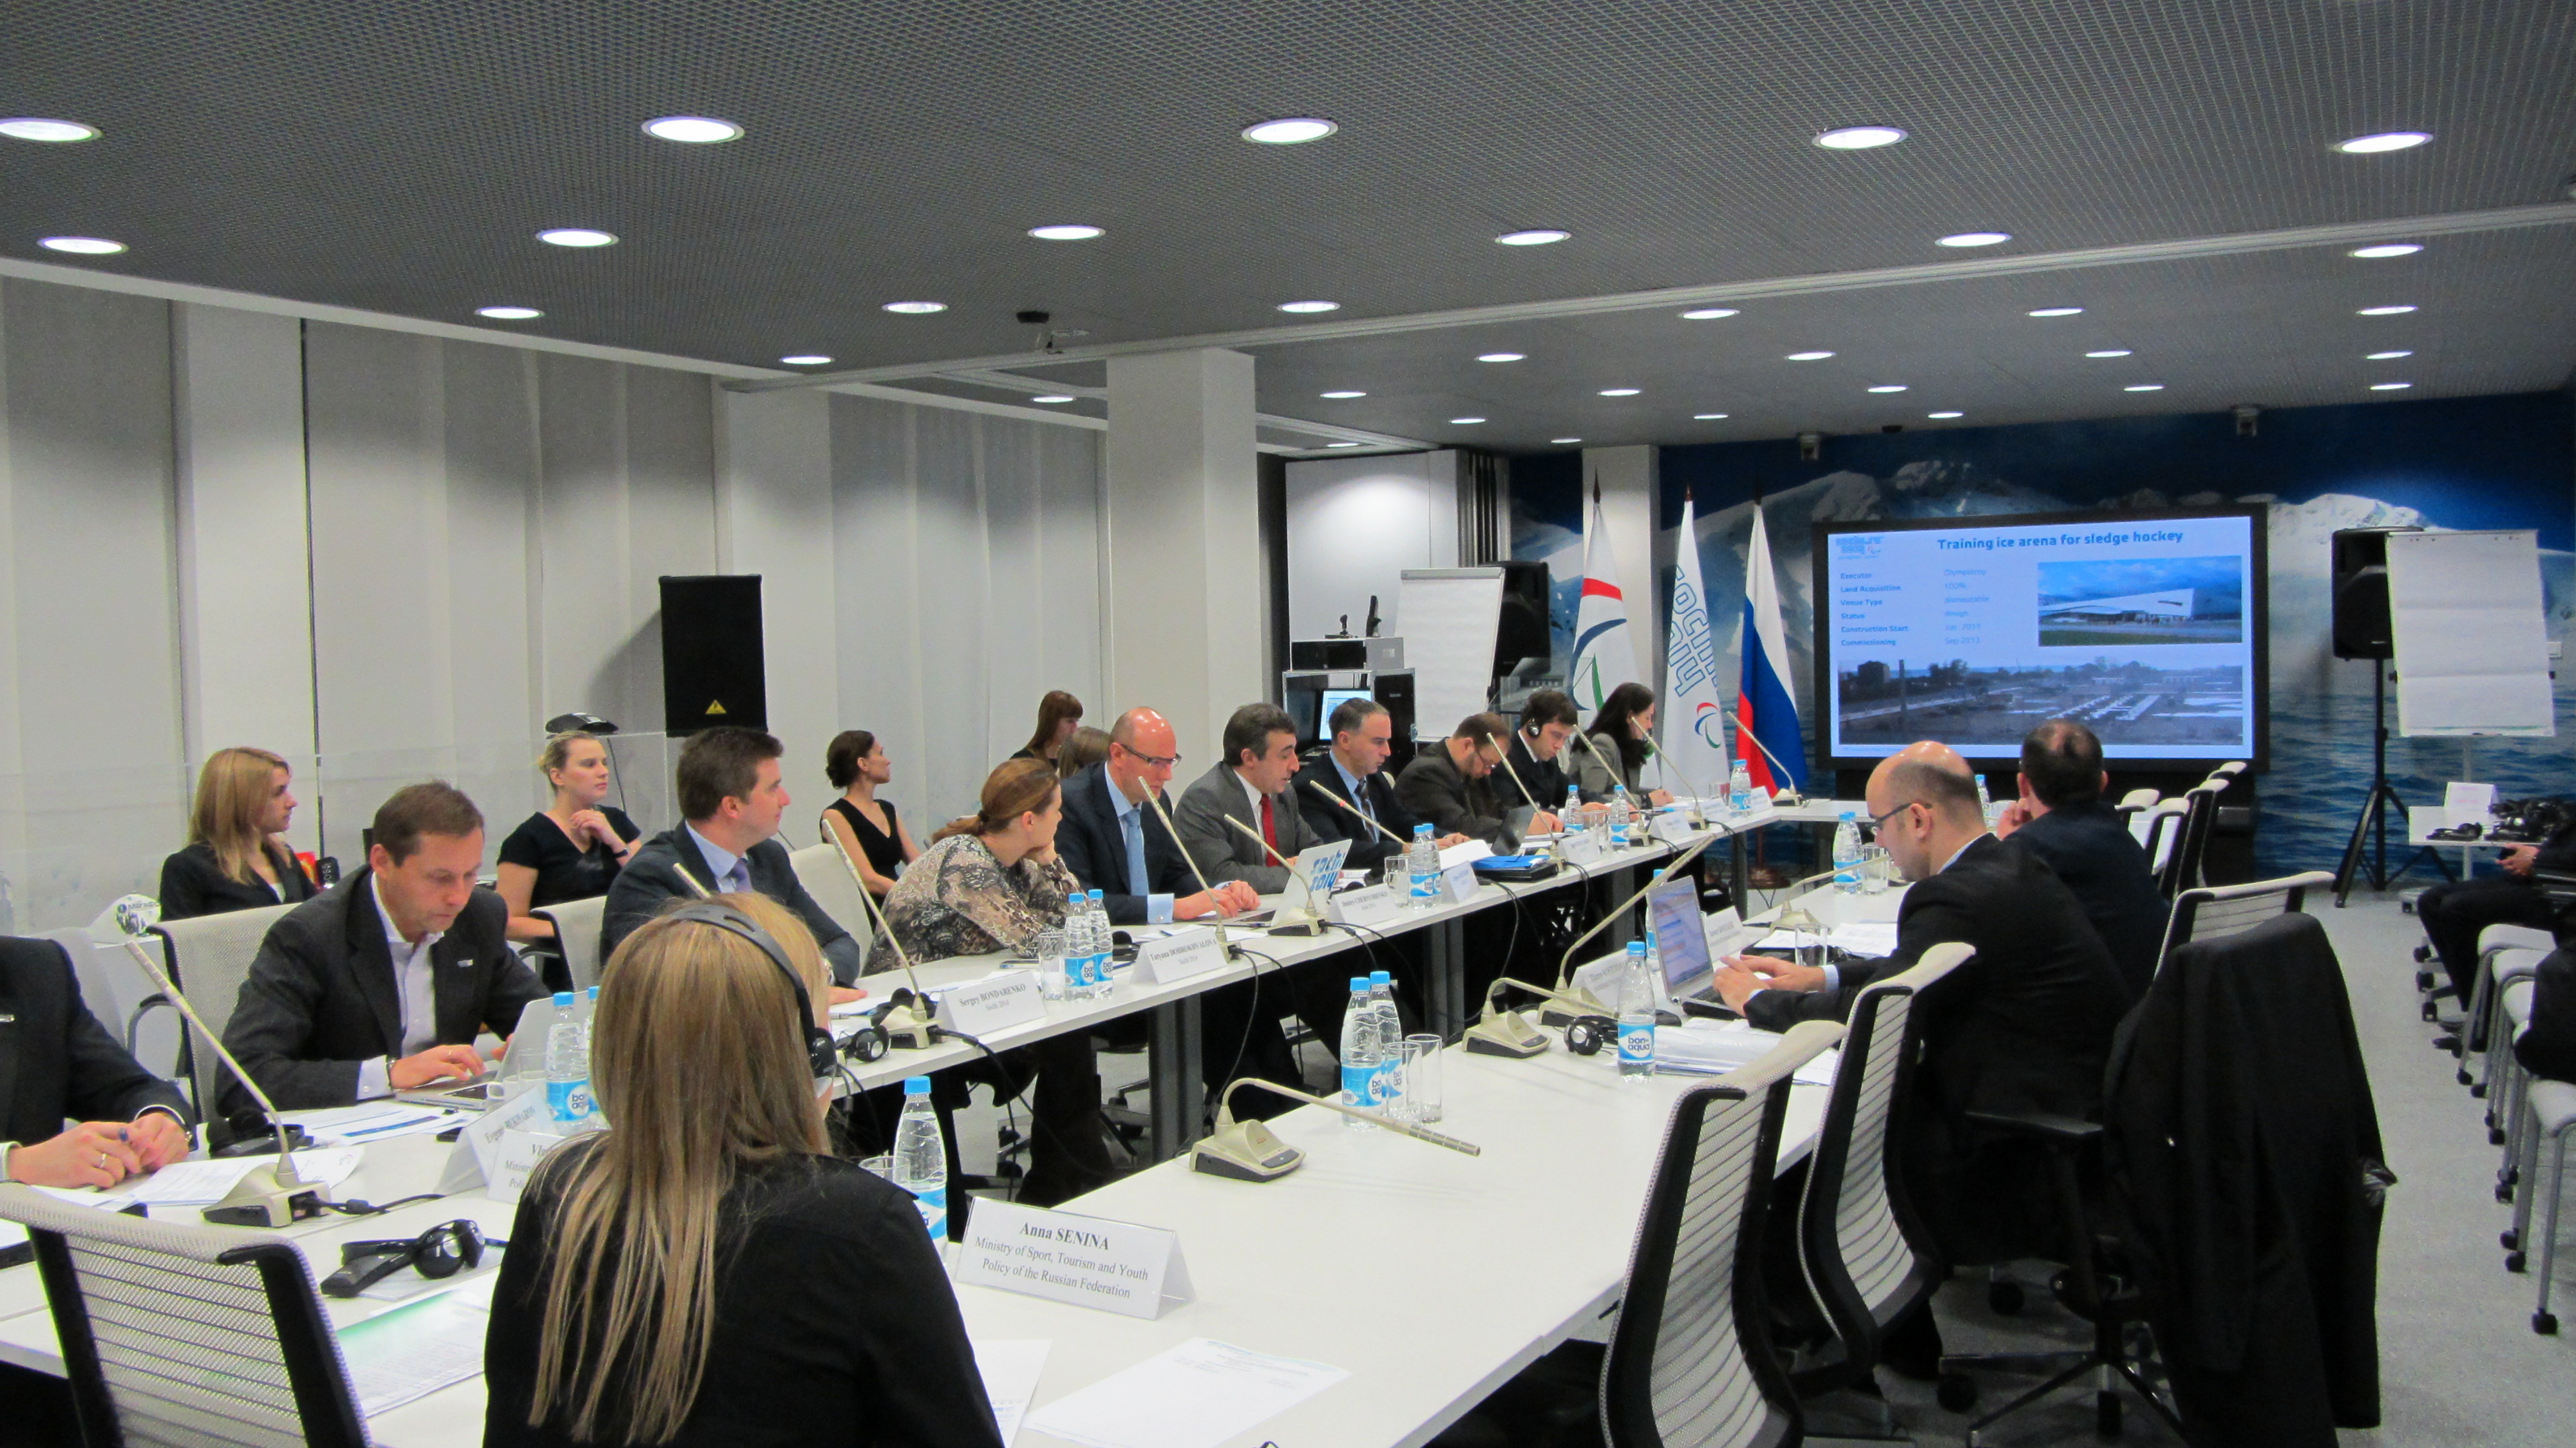 Sochi 2014 Project Review - December 2011